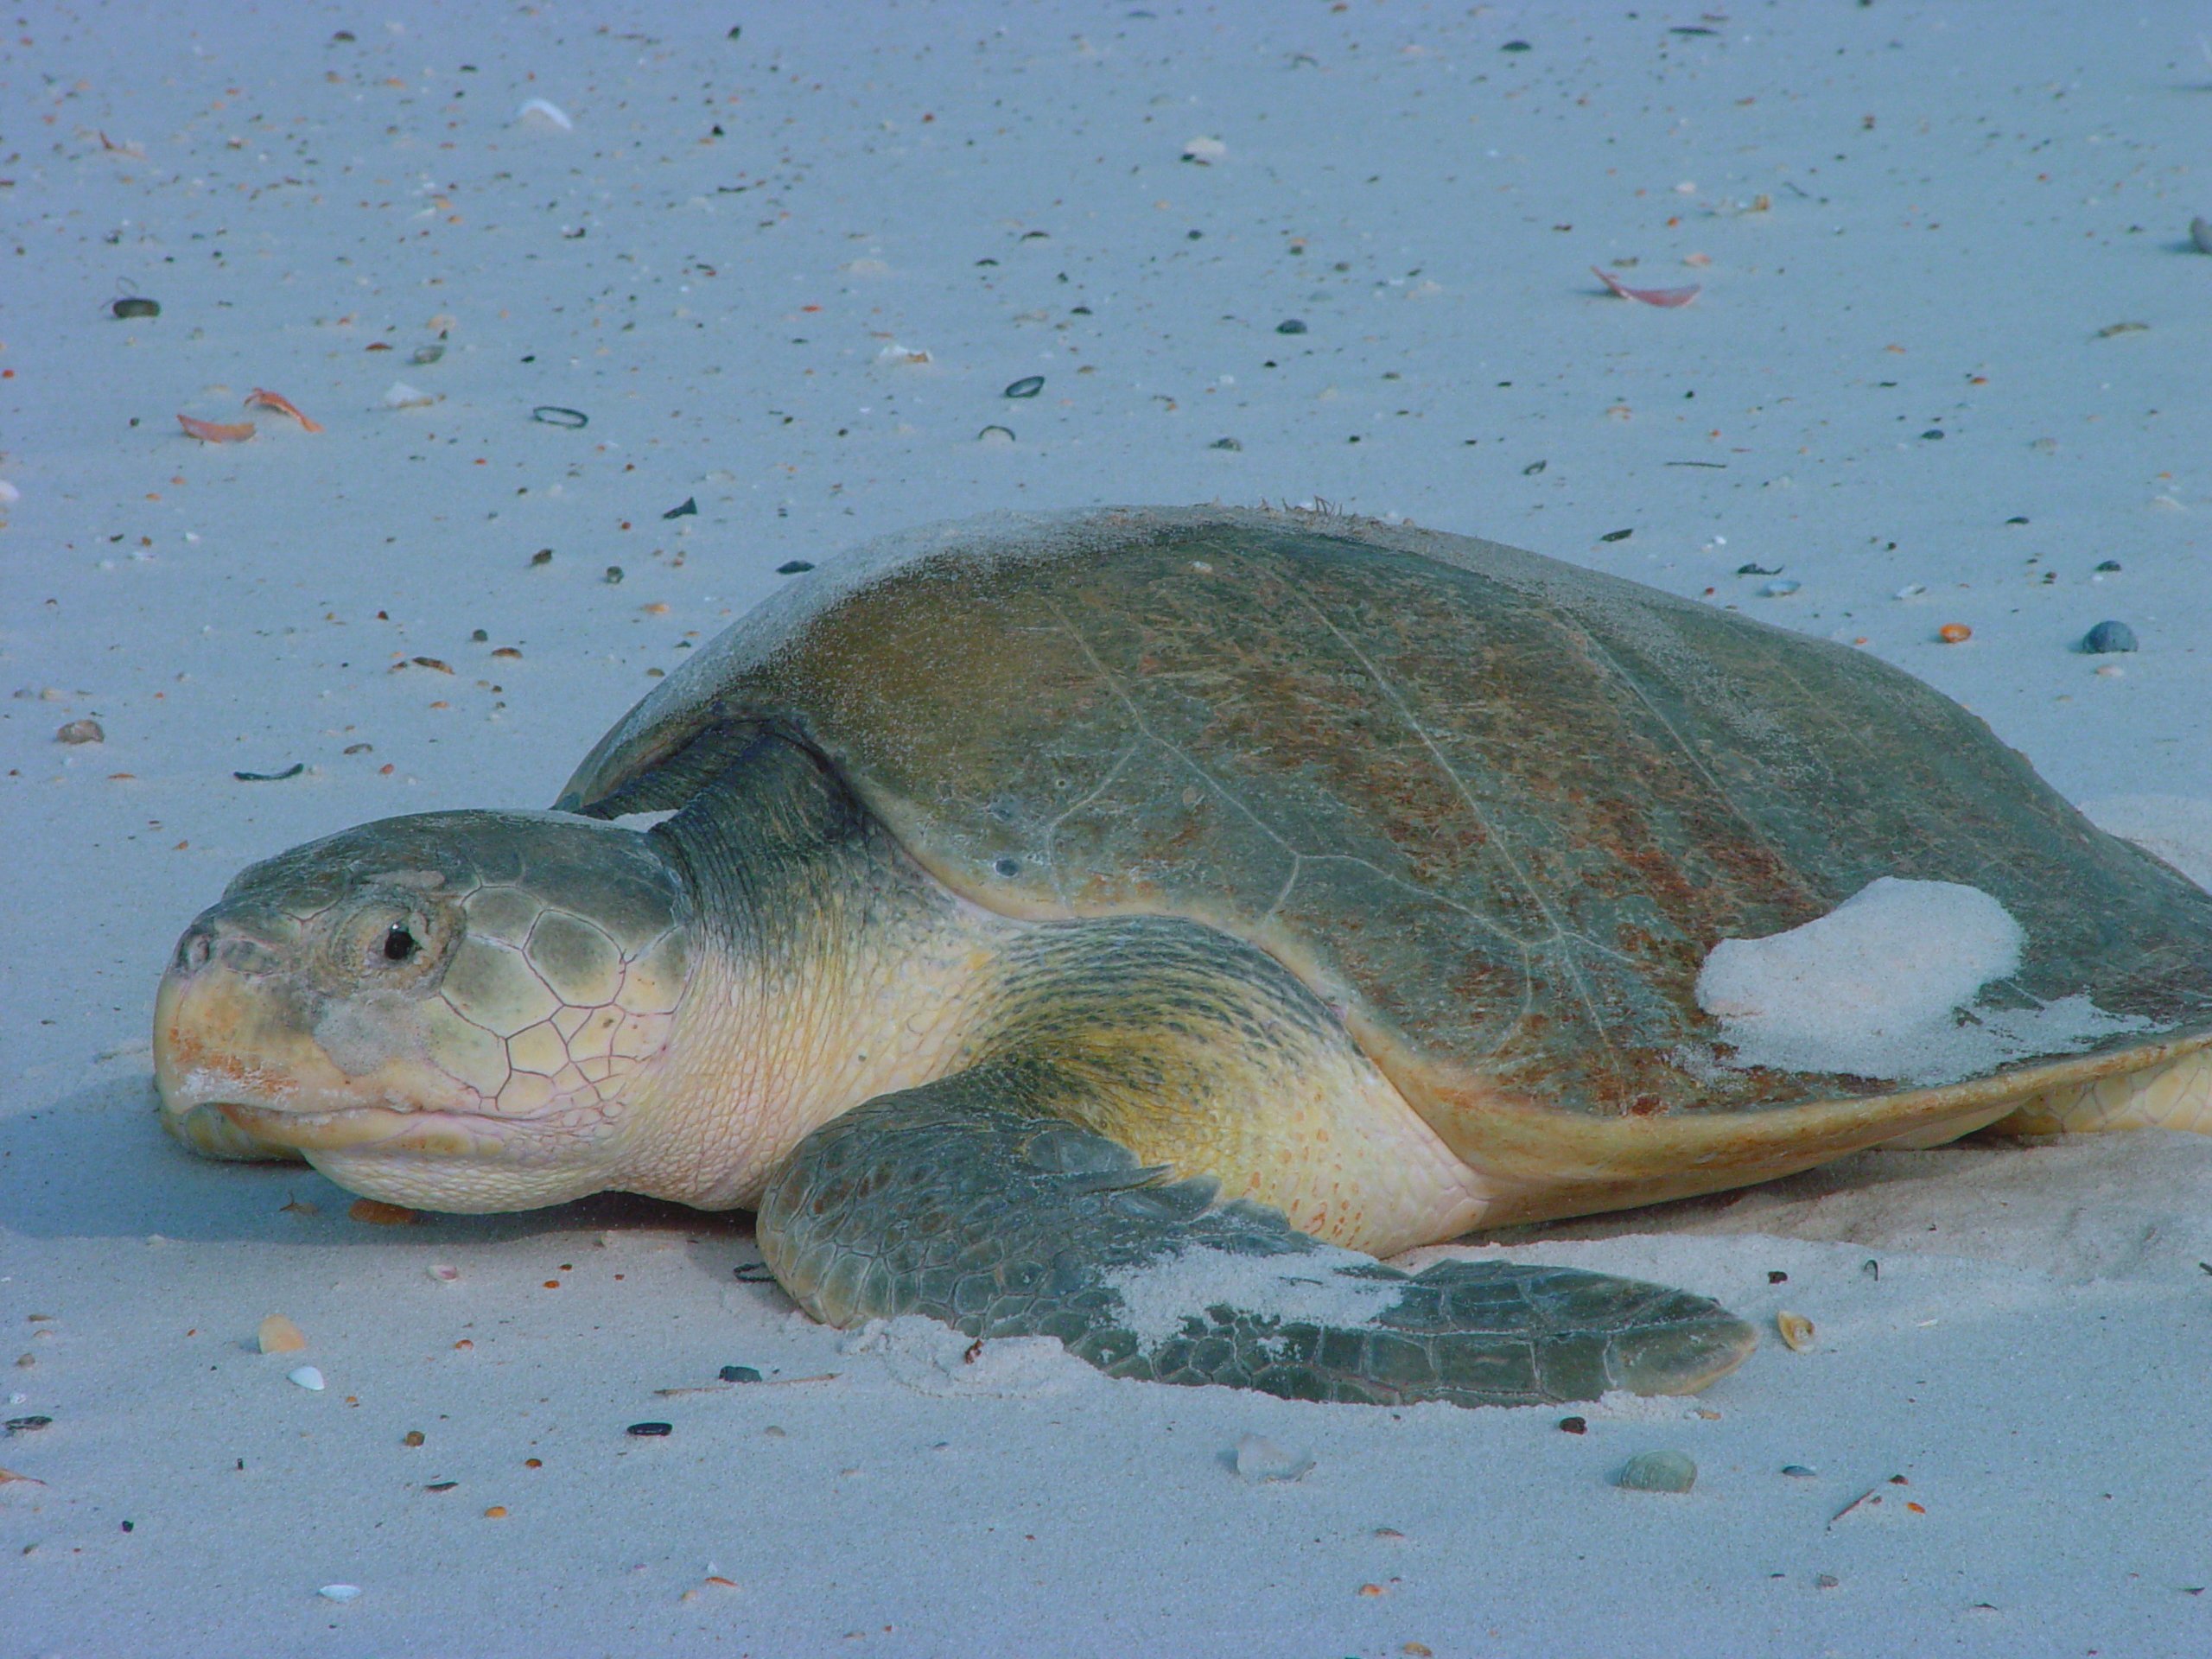 What are the nesting groups of Kemp's ridley sea turtles called?